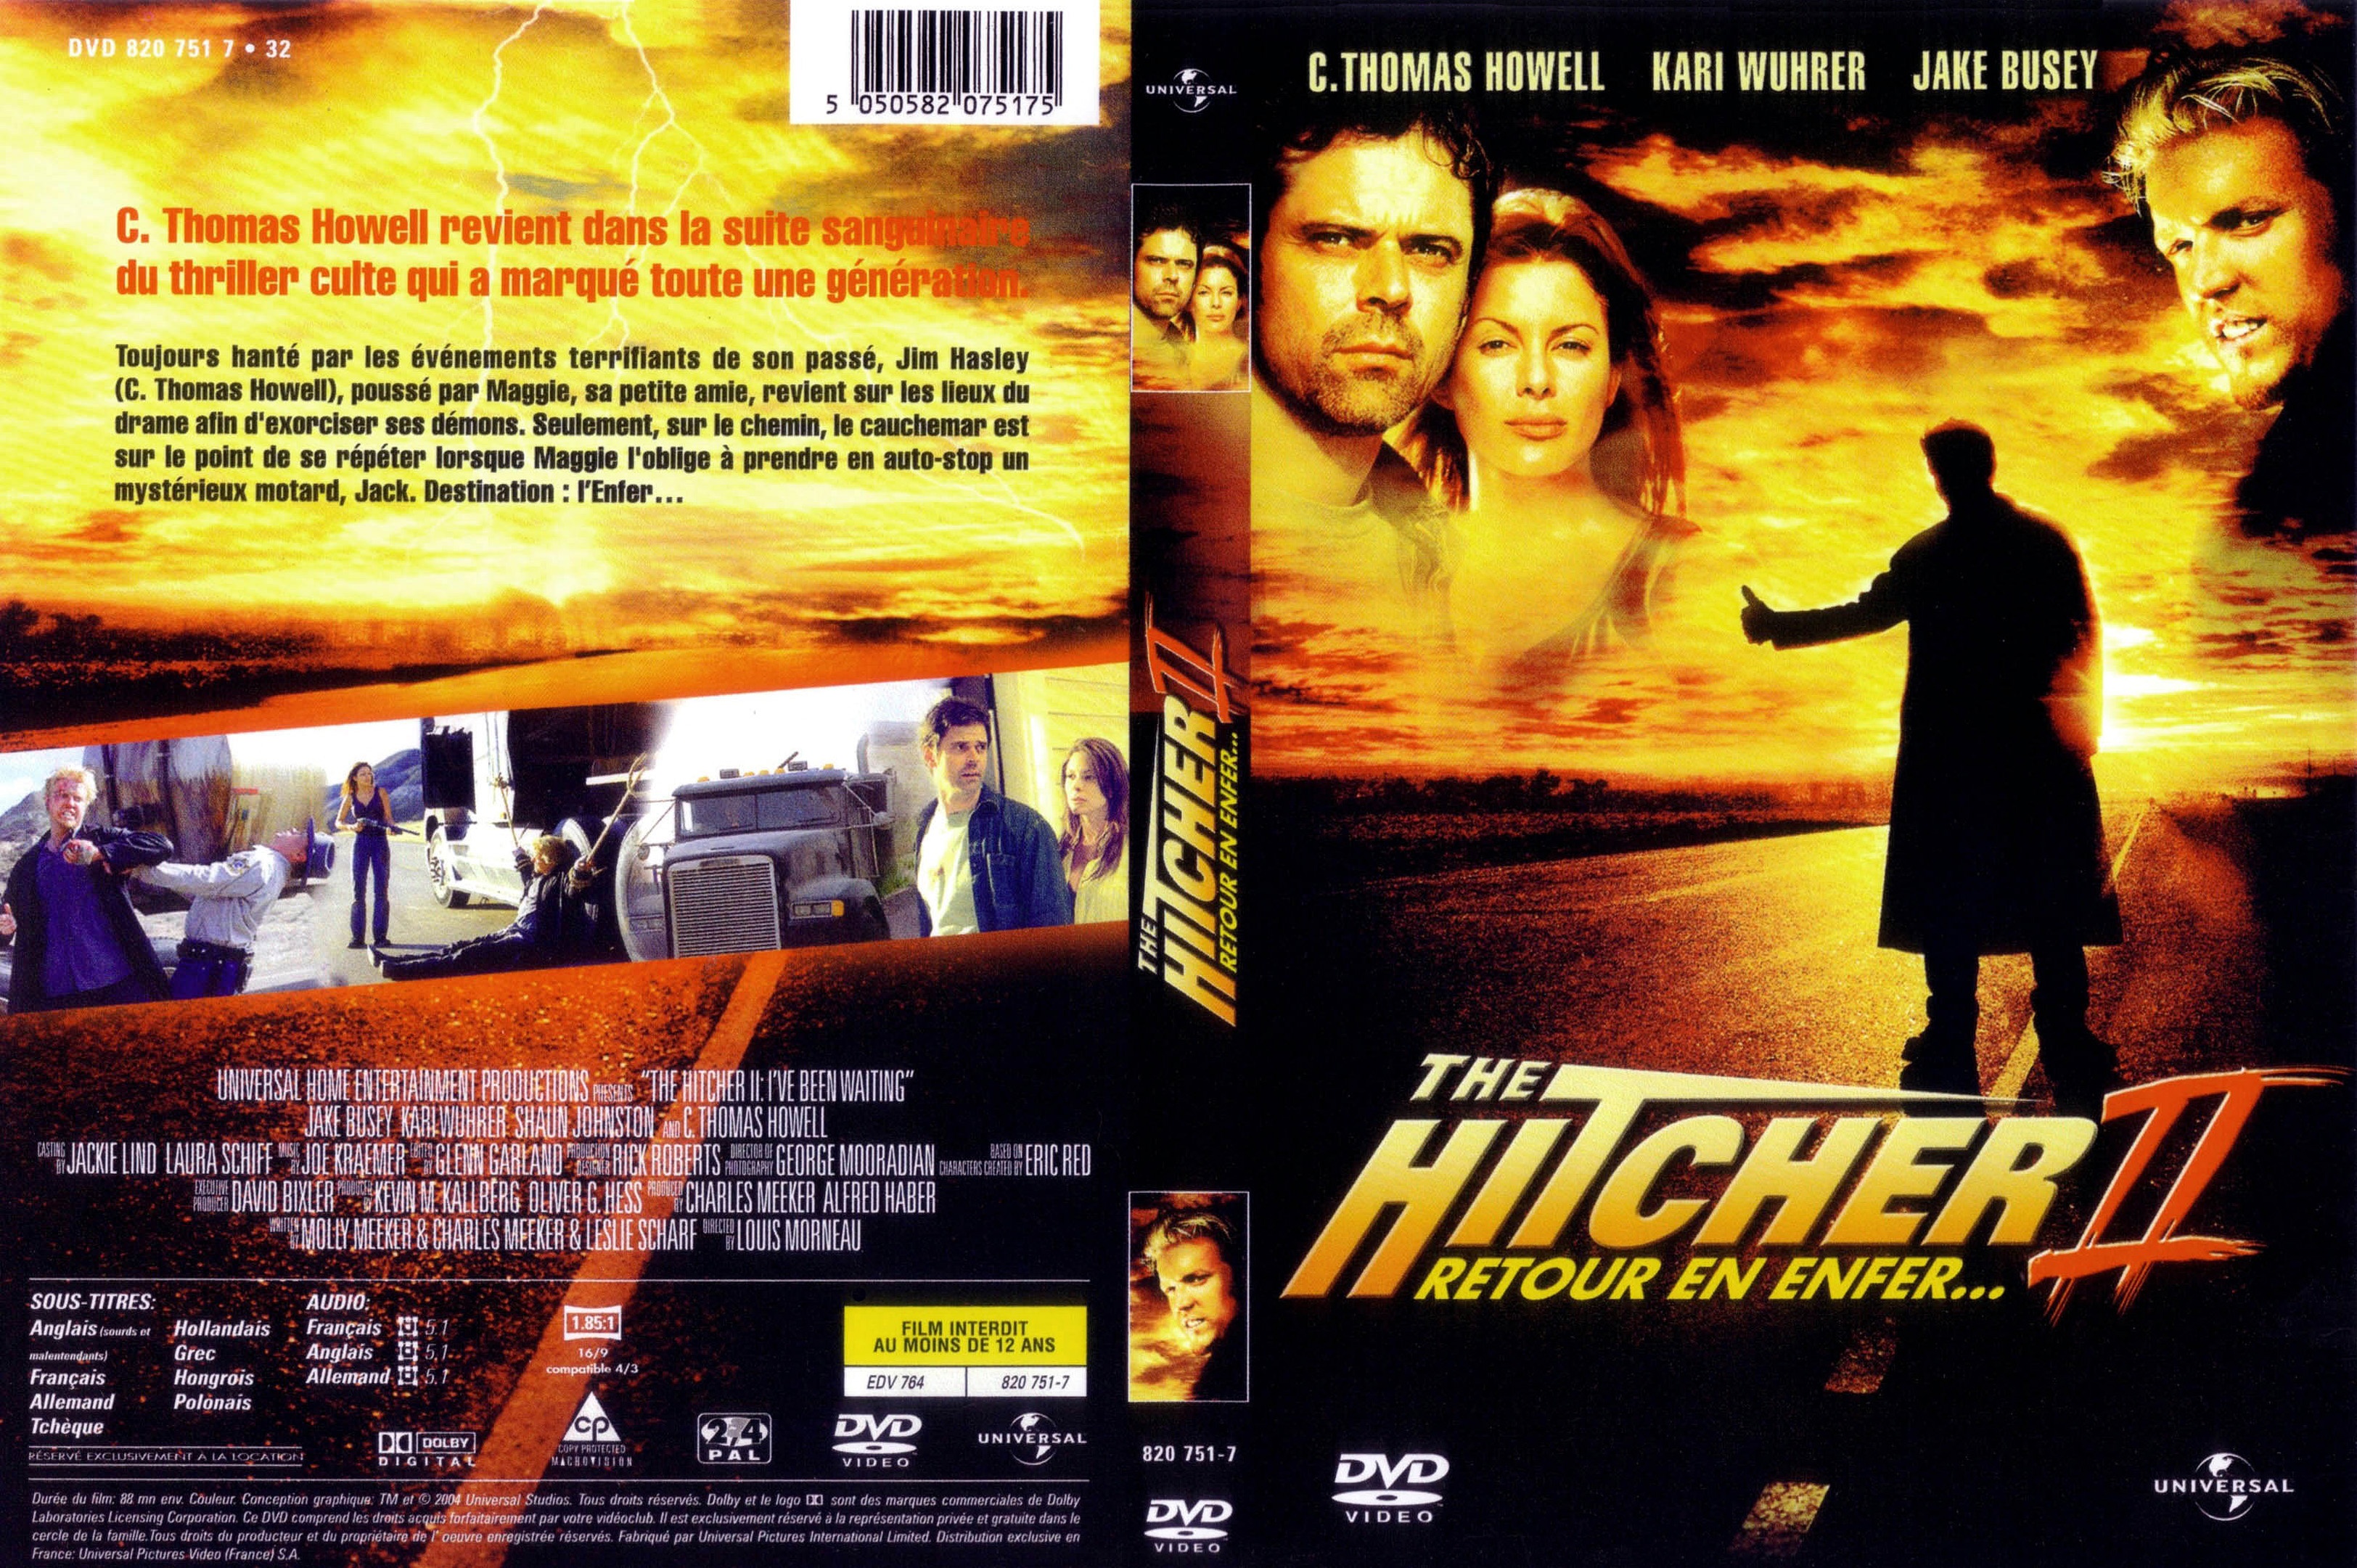 Jaquette DVD The hitcher 2